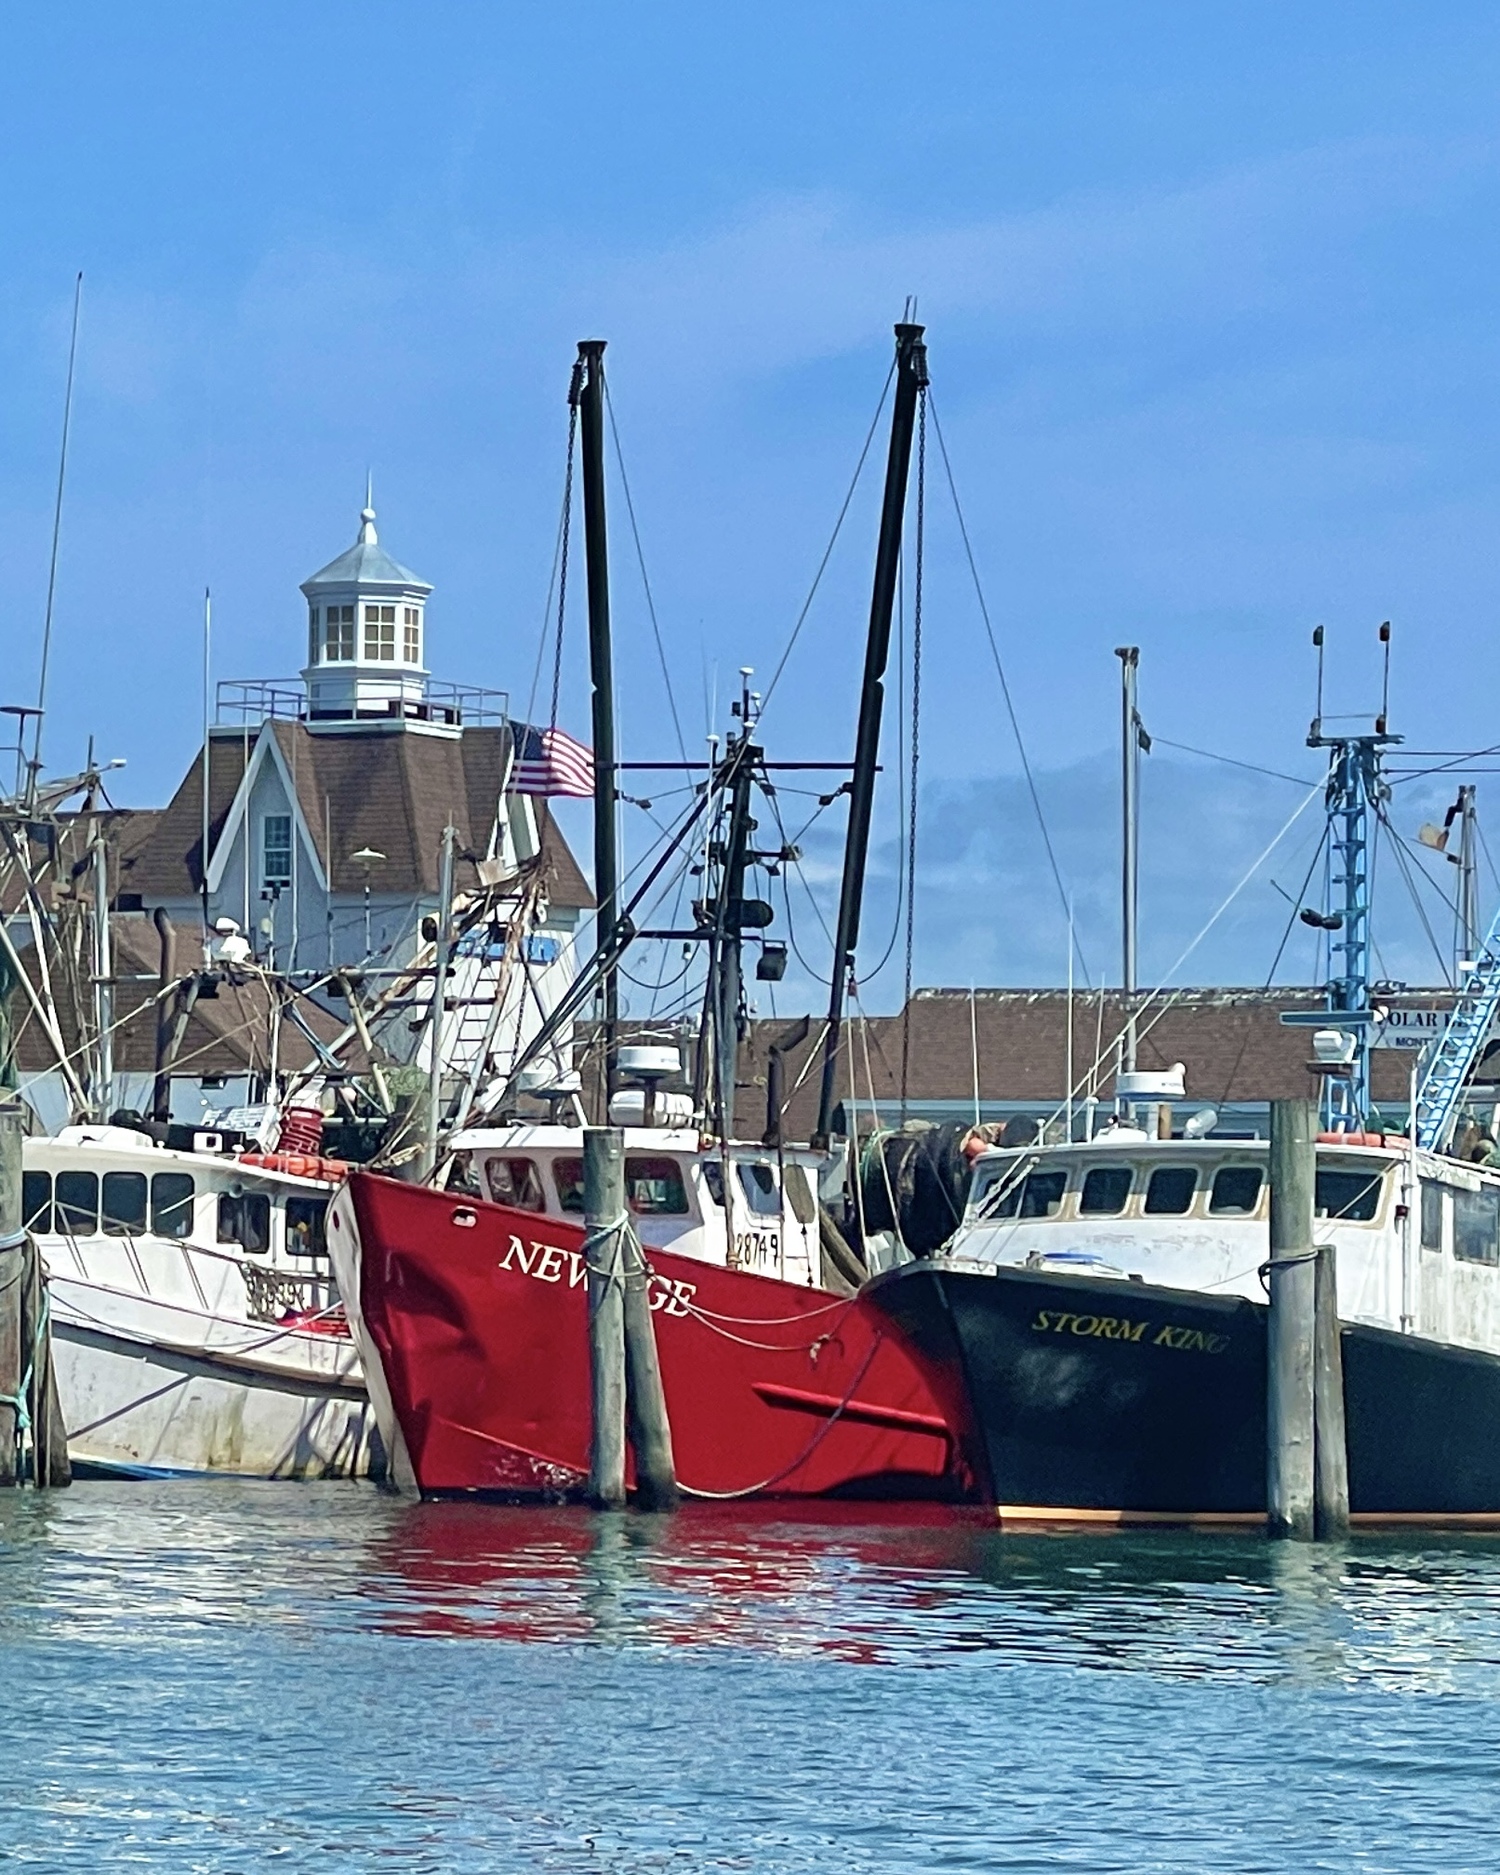 The captain of the Montauk commercial fishing boat New Age is currently on trial in federal court for on felony fraud charges related to a scheme with the owners of Gosman's Fish Dock to sell fish caught illegally in violation of federal fisheries regulations.